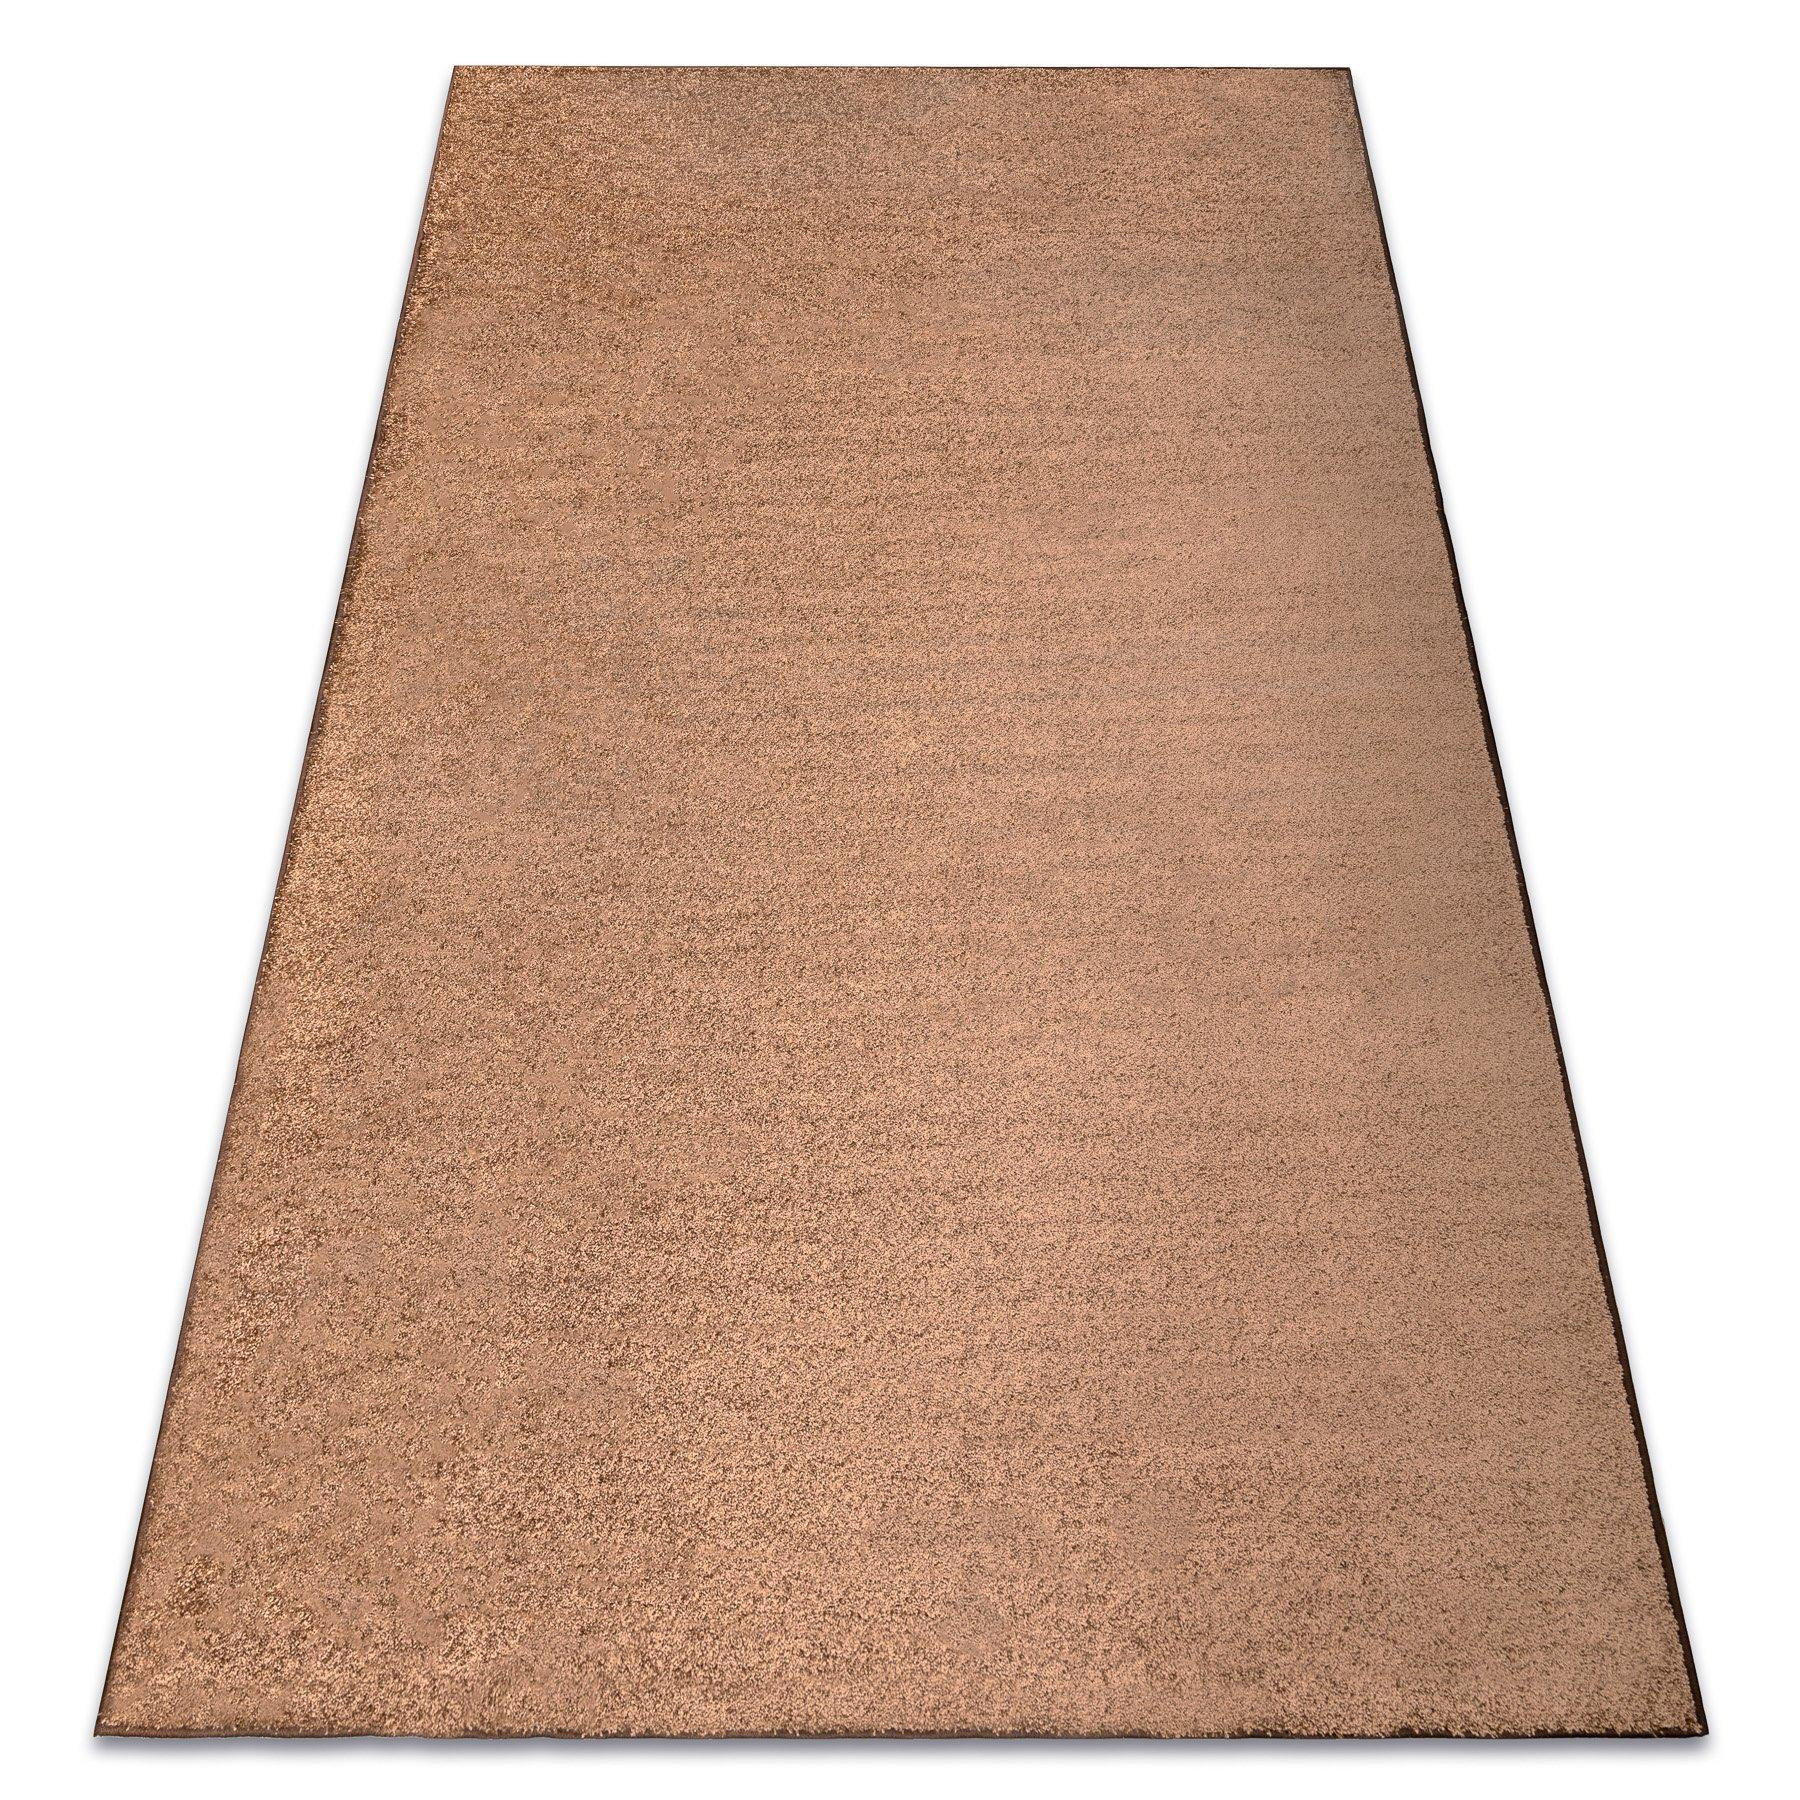 Wall-To-Wall Indus Rug - image 1